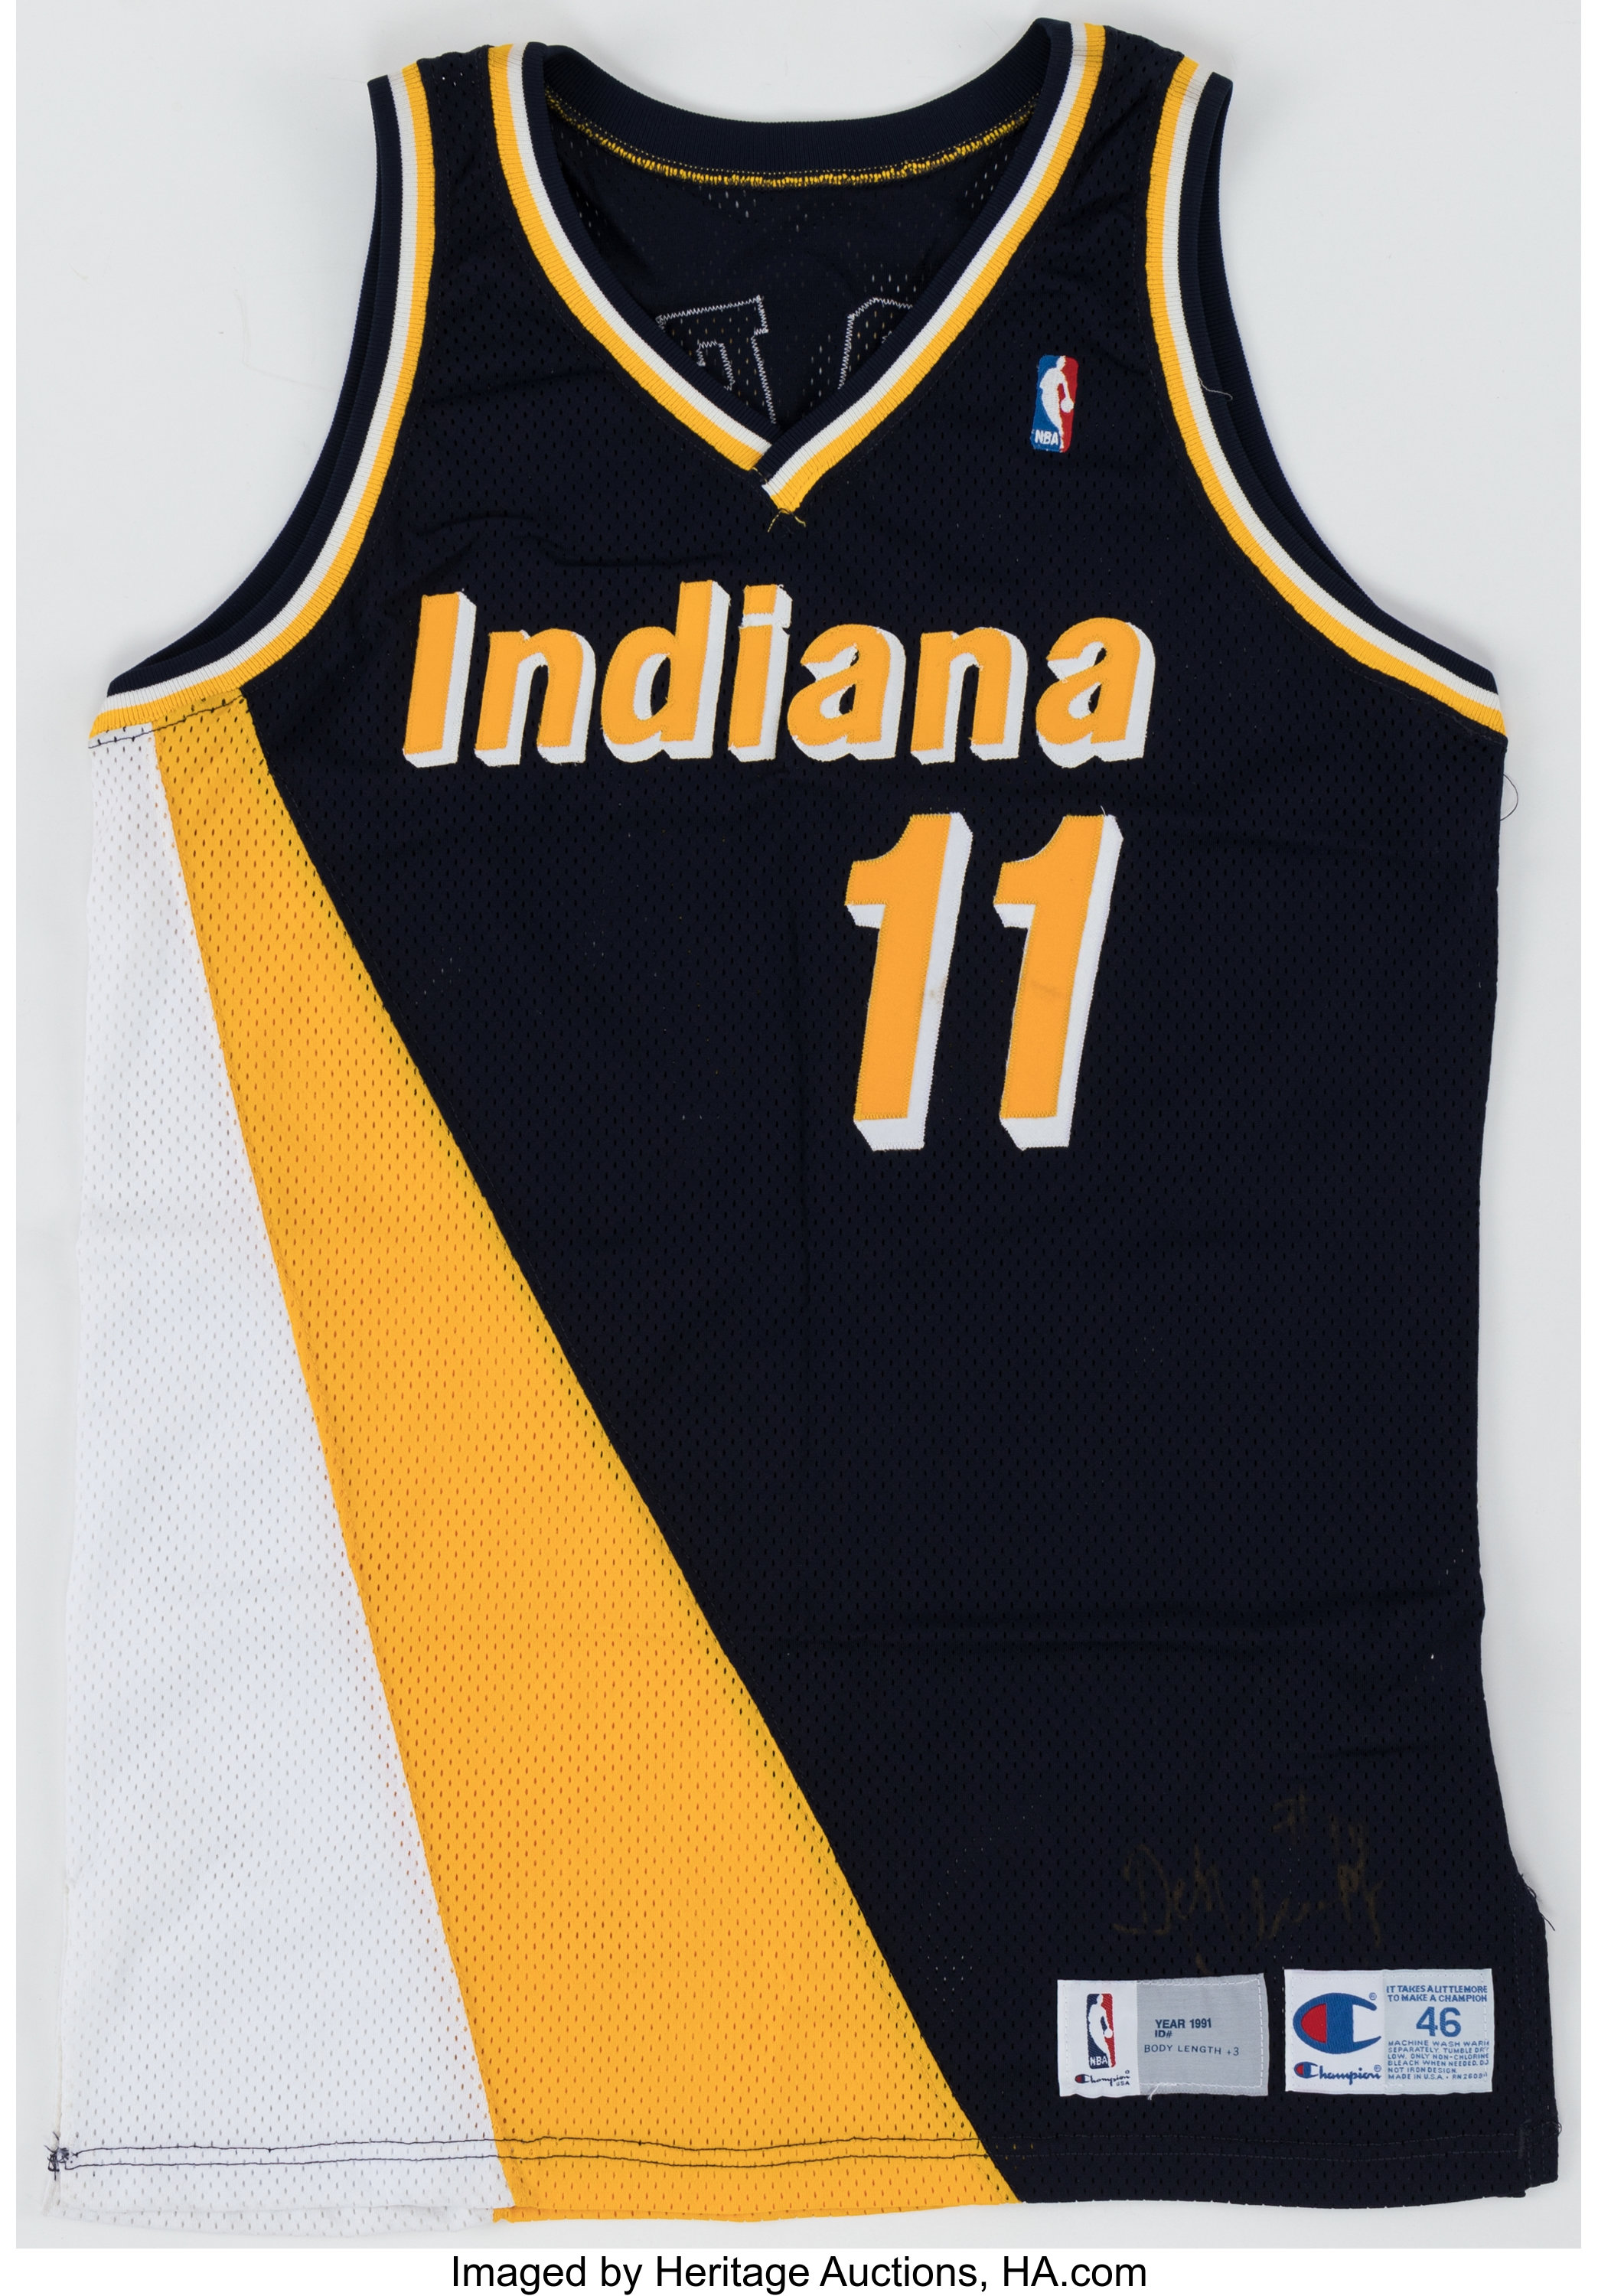 Indiana Pacers current uniforms